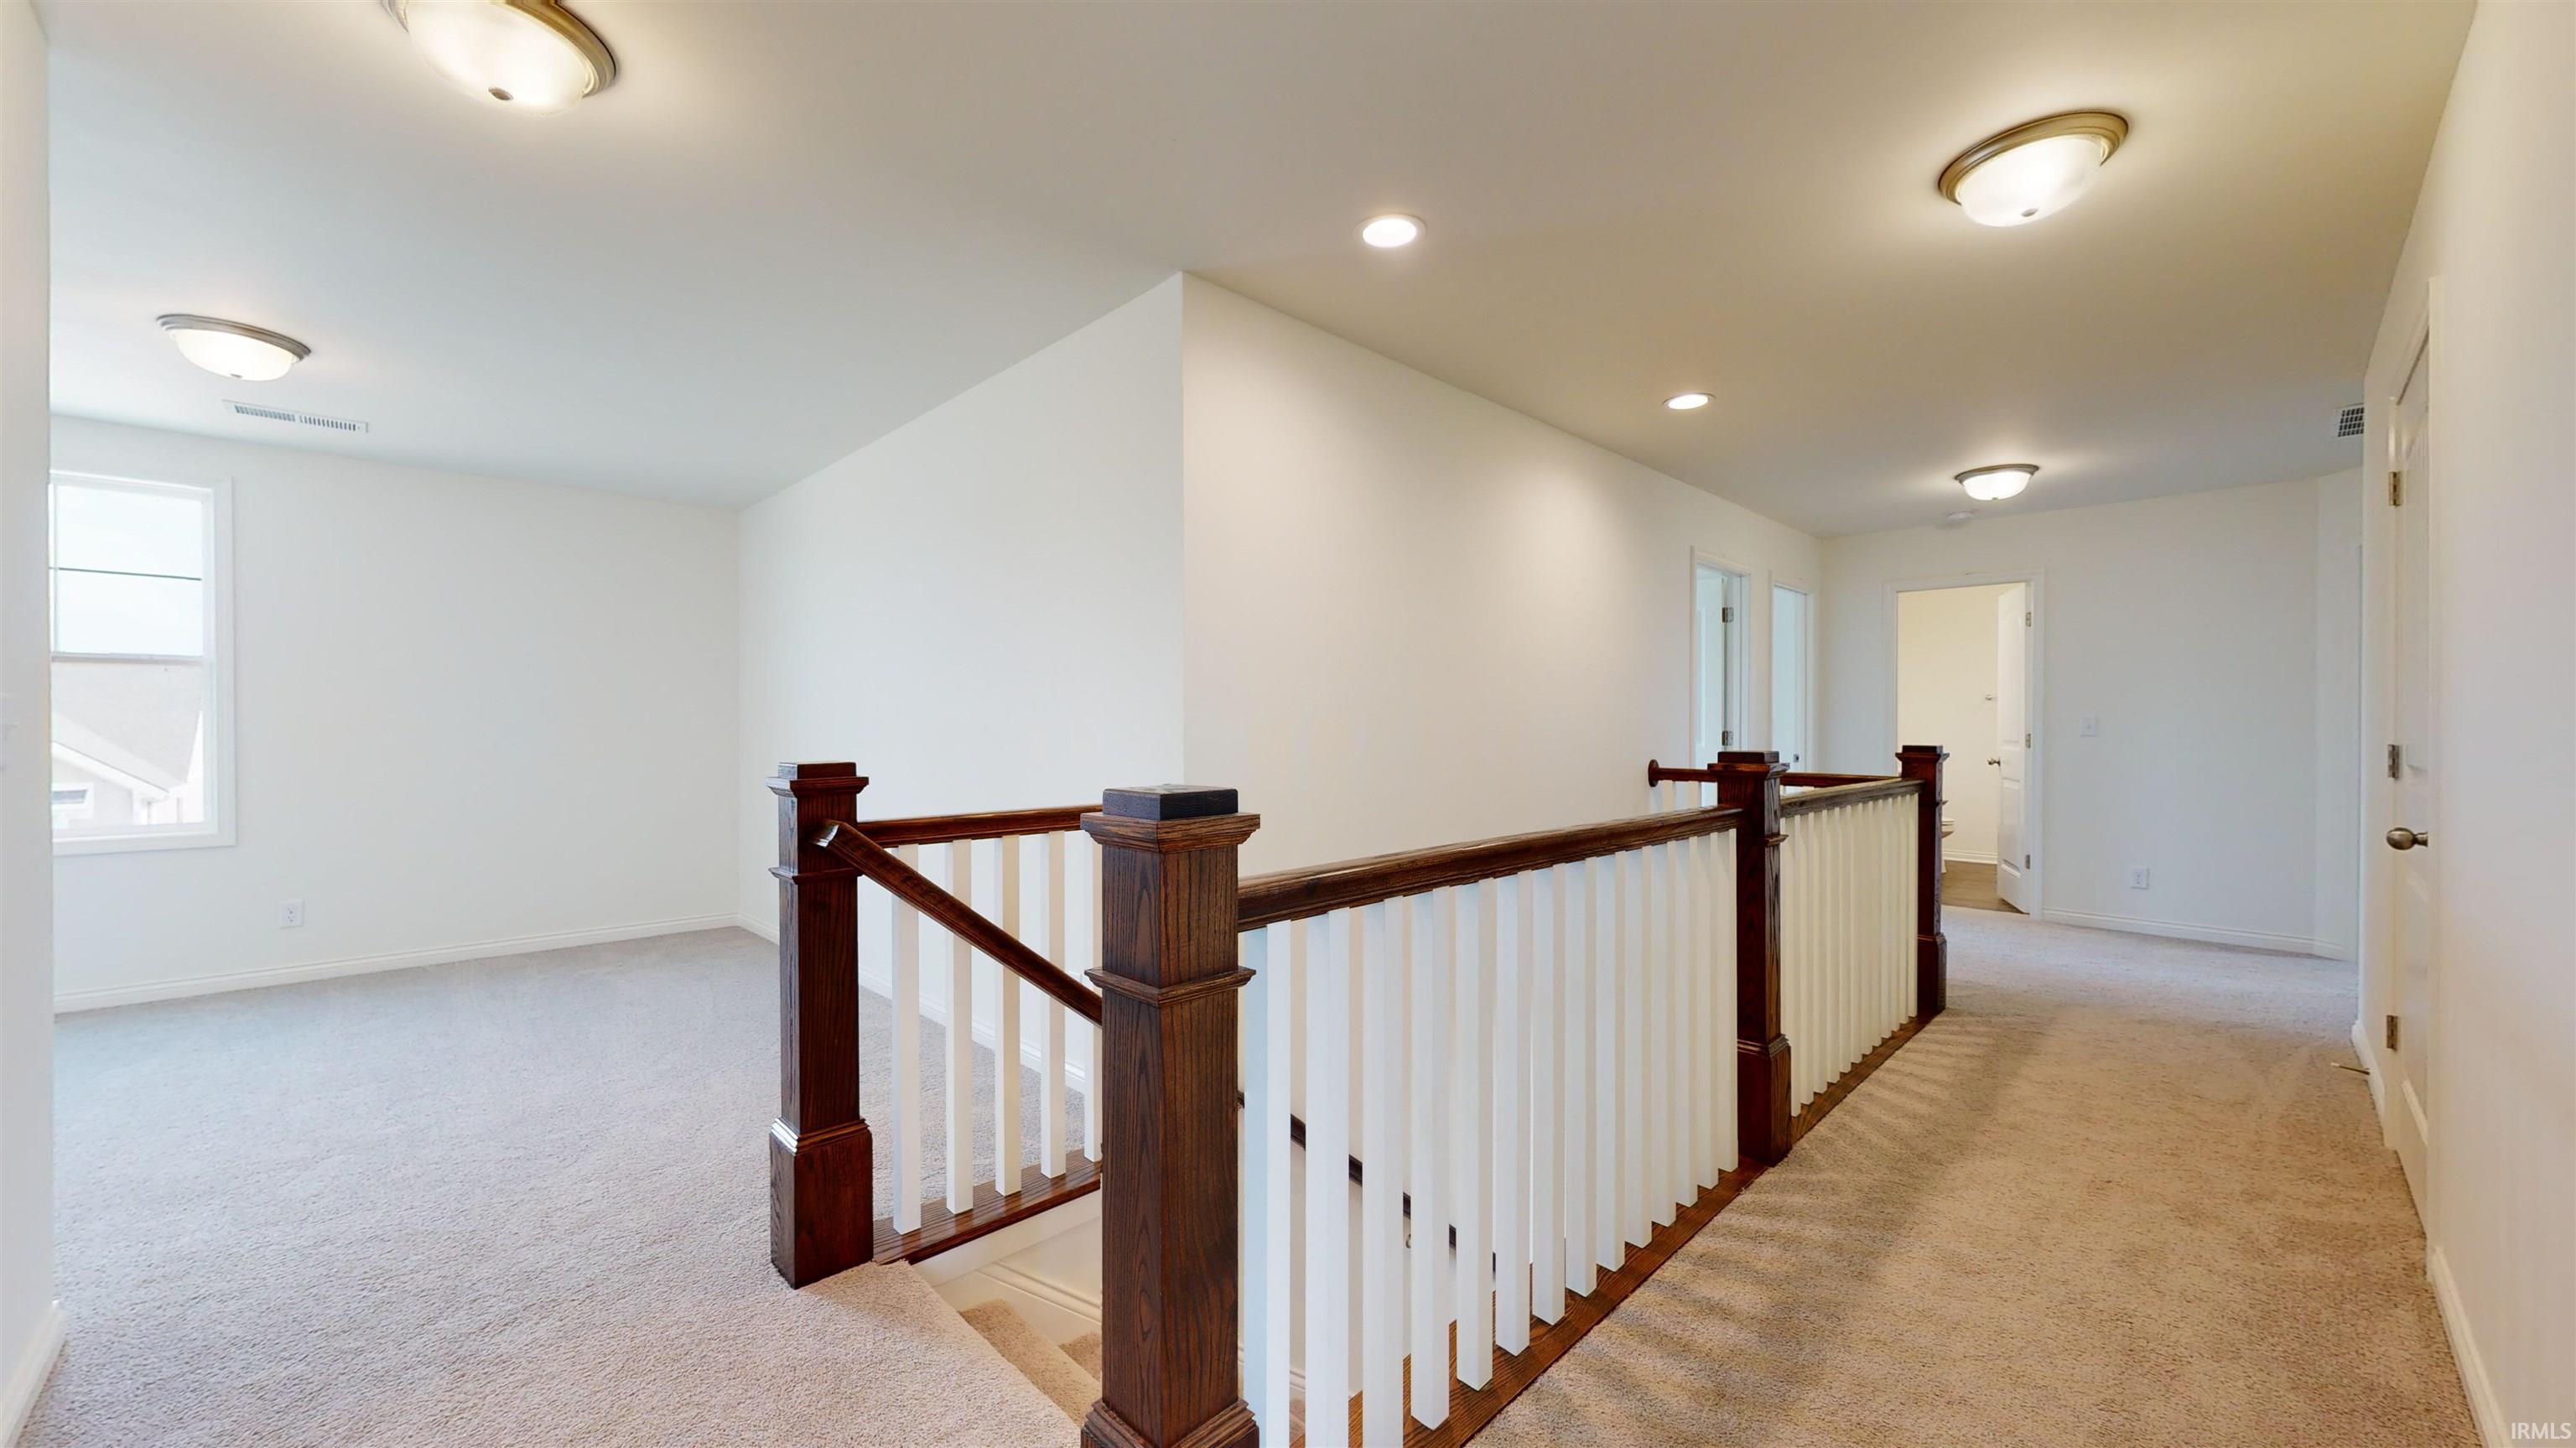 Decorative stained newel posts and painted balusters